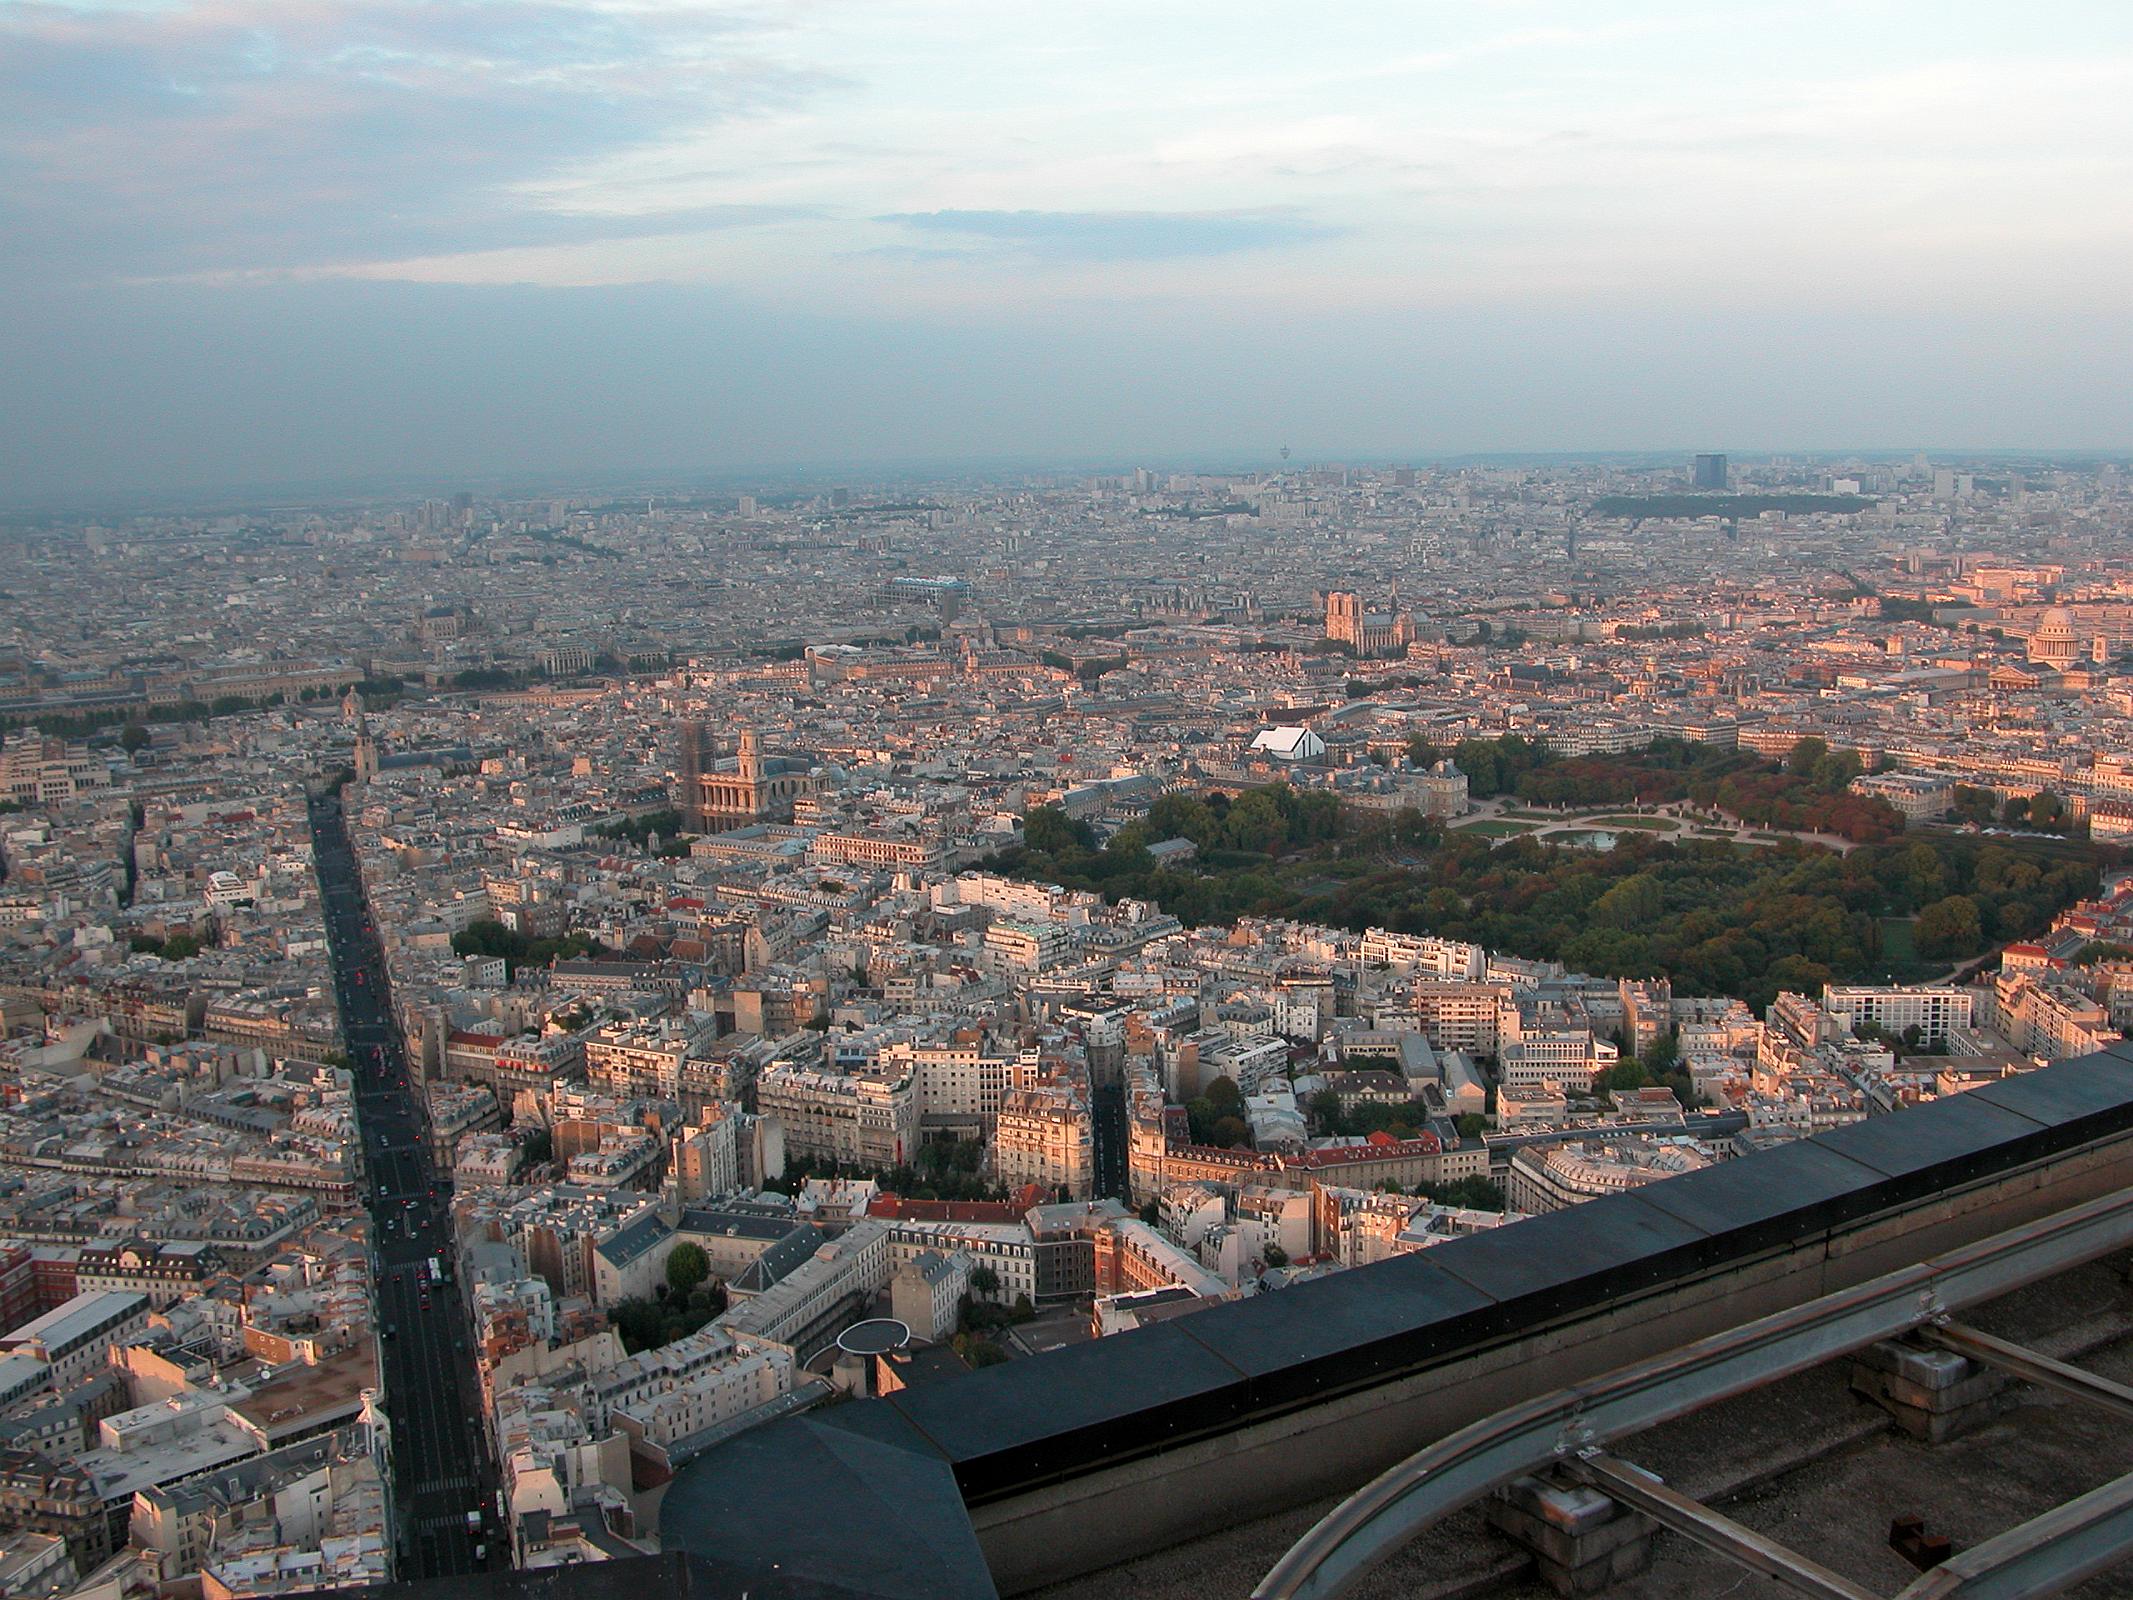 Paris 01 View To Northeast At Sunset Includes Luxembourg Gardens And Notre Dame From Montparnasse Tower 